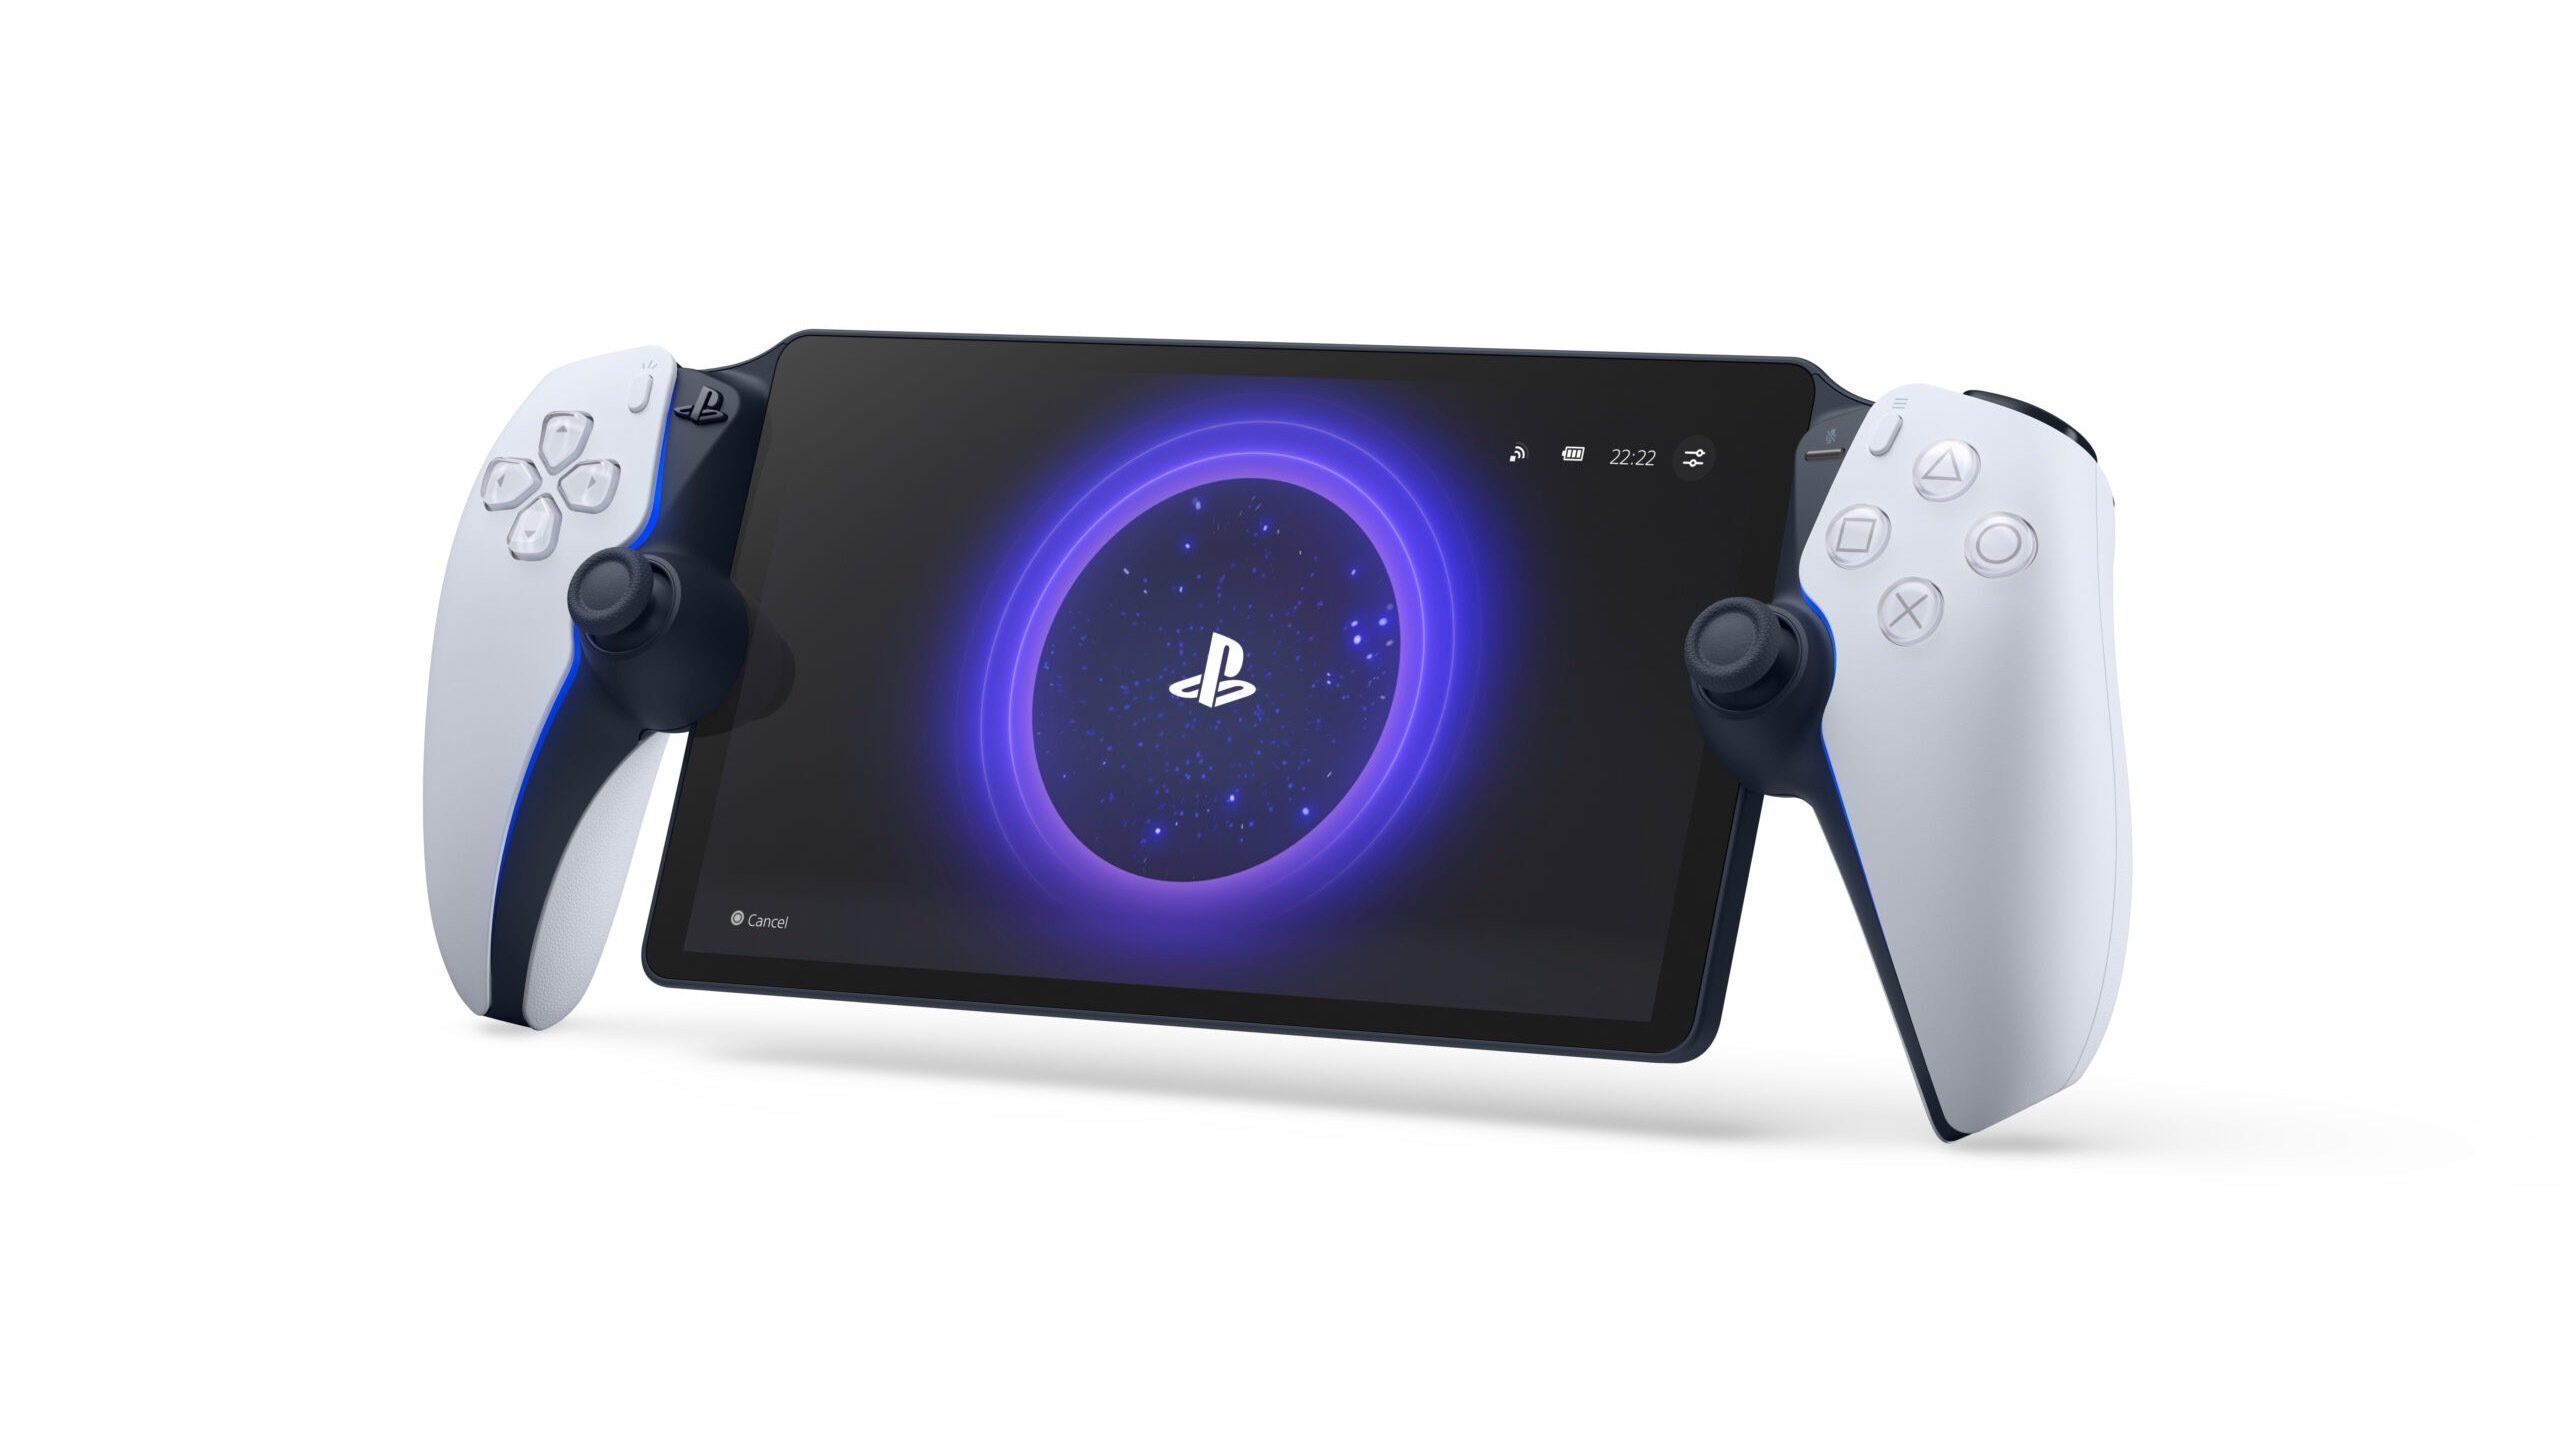 A rendering of the playstation portal